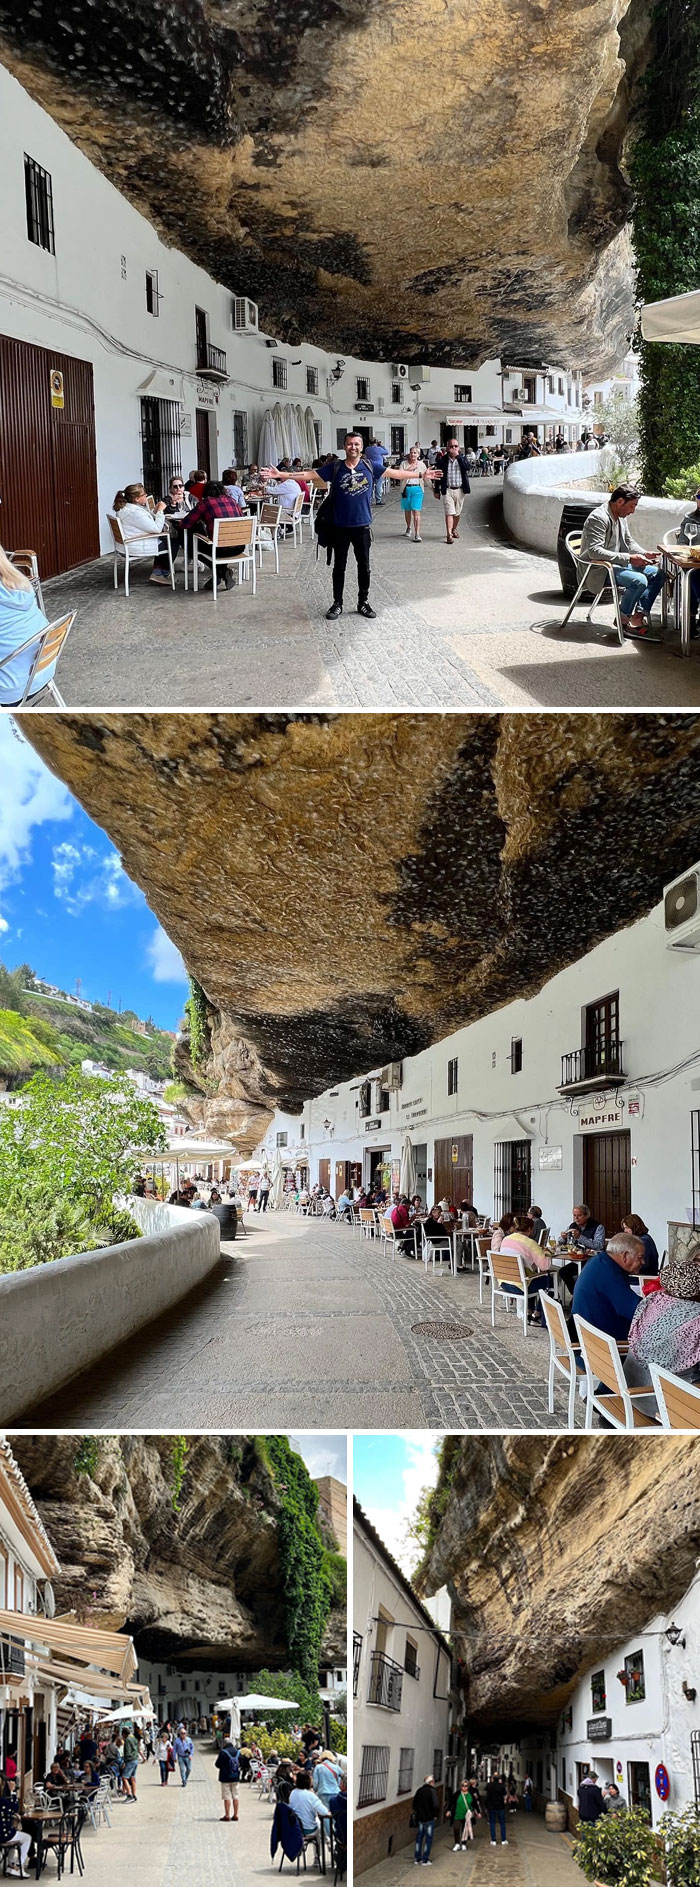 One Of My Bucket List Items Was To Visit This Stunning Town Where The Houses Are Literally Under The Rock